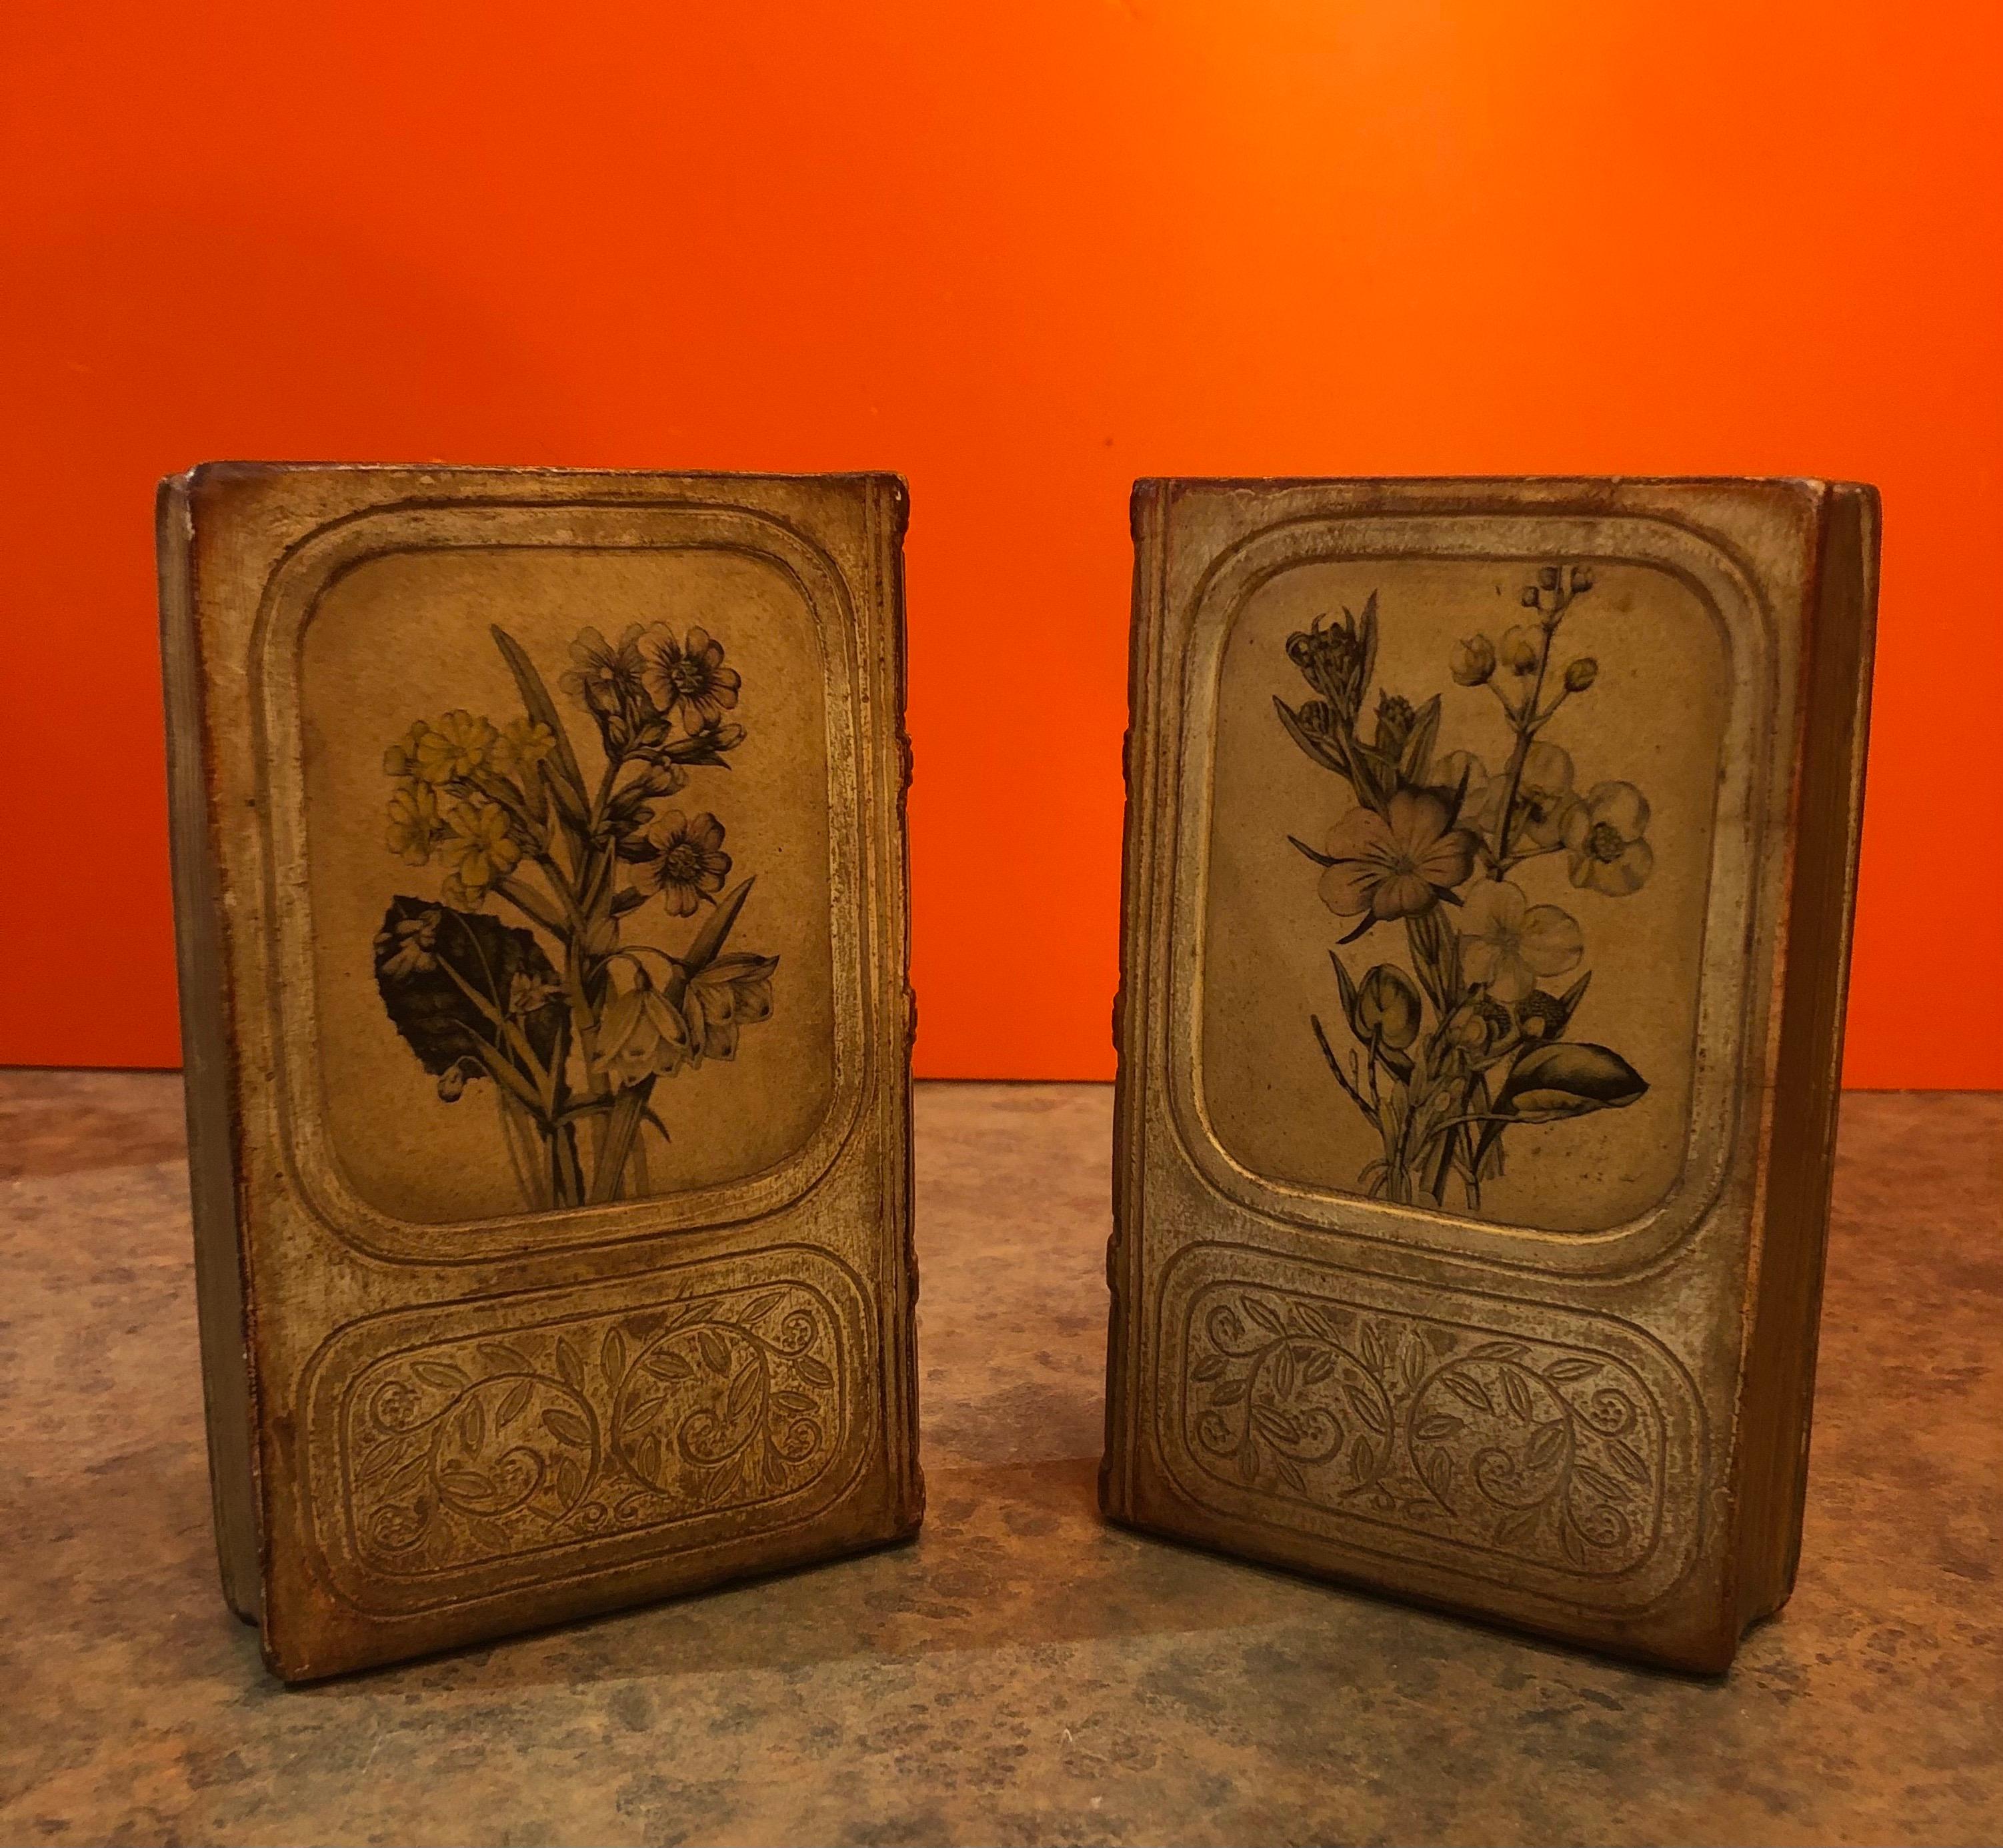 Nice pair of Hollywood Regency bookends in a gold gilt finish in the shape of books with a floral cover jacket by Borghese of Italy, circa 1960s. The pair are in good vintage condition and measure 6